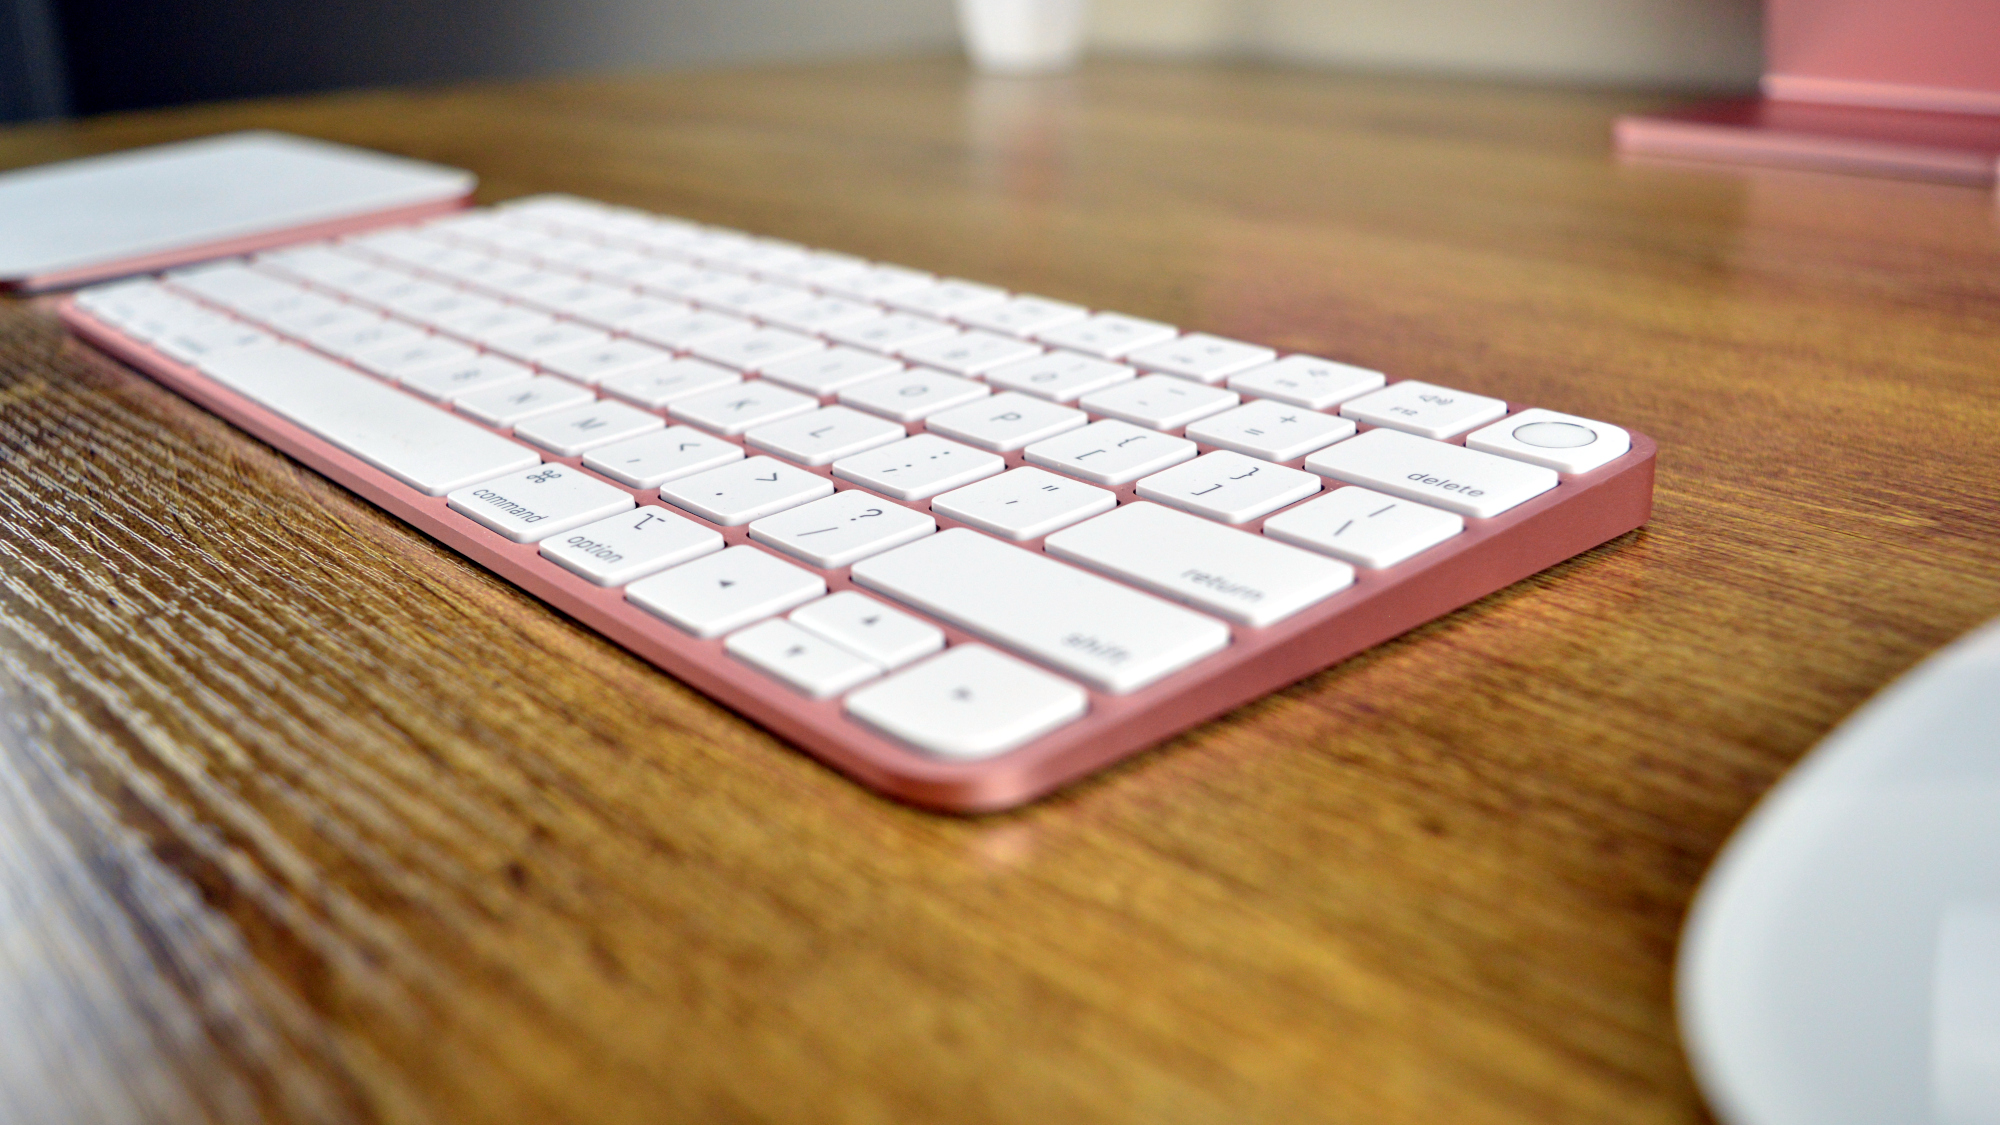 best wireless keyboard and mouse for mac mini